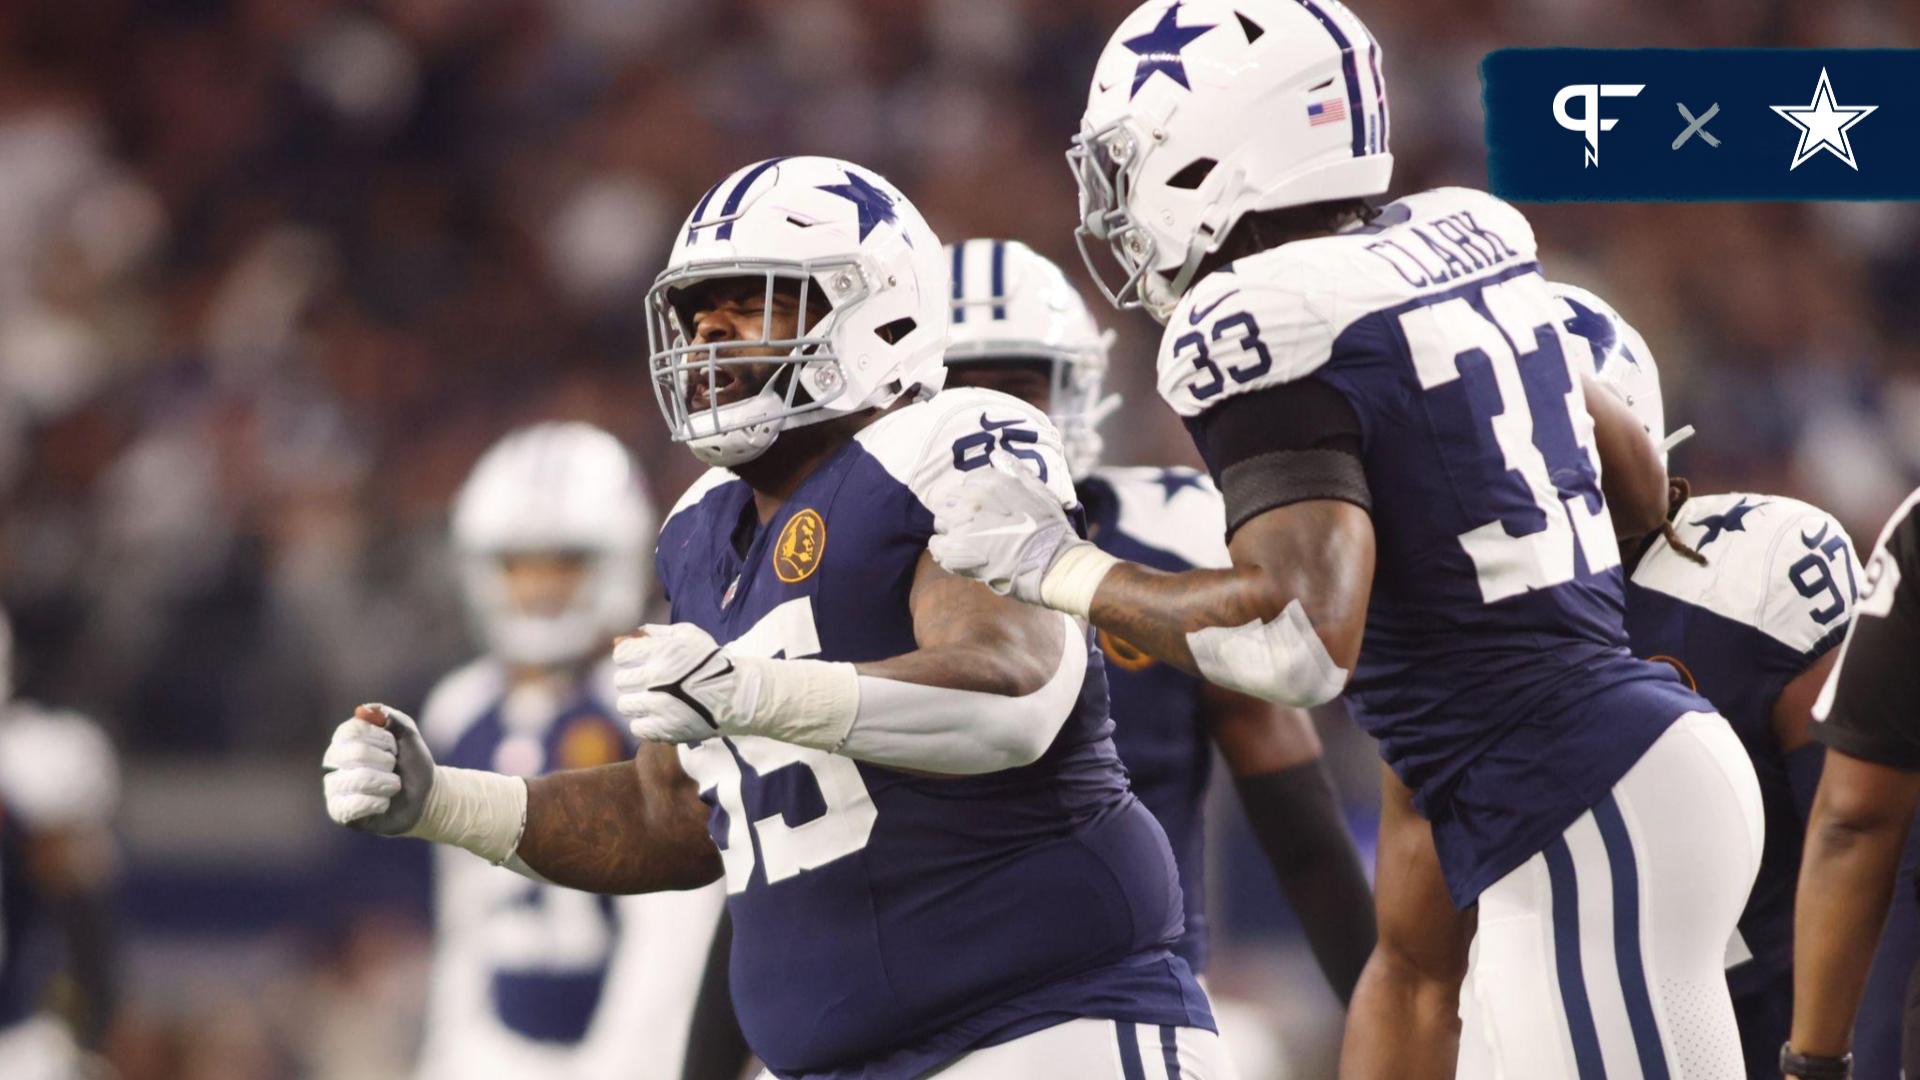 Dallas Cowboys defensive tackle Johnathan Hankins (95) and linebacker Damone Clark (33) celebrate a sack in the fourth quarter against the Washington Commanders at AT&T Stadium.